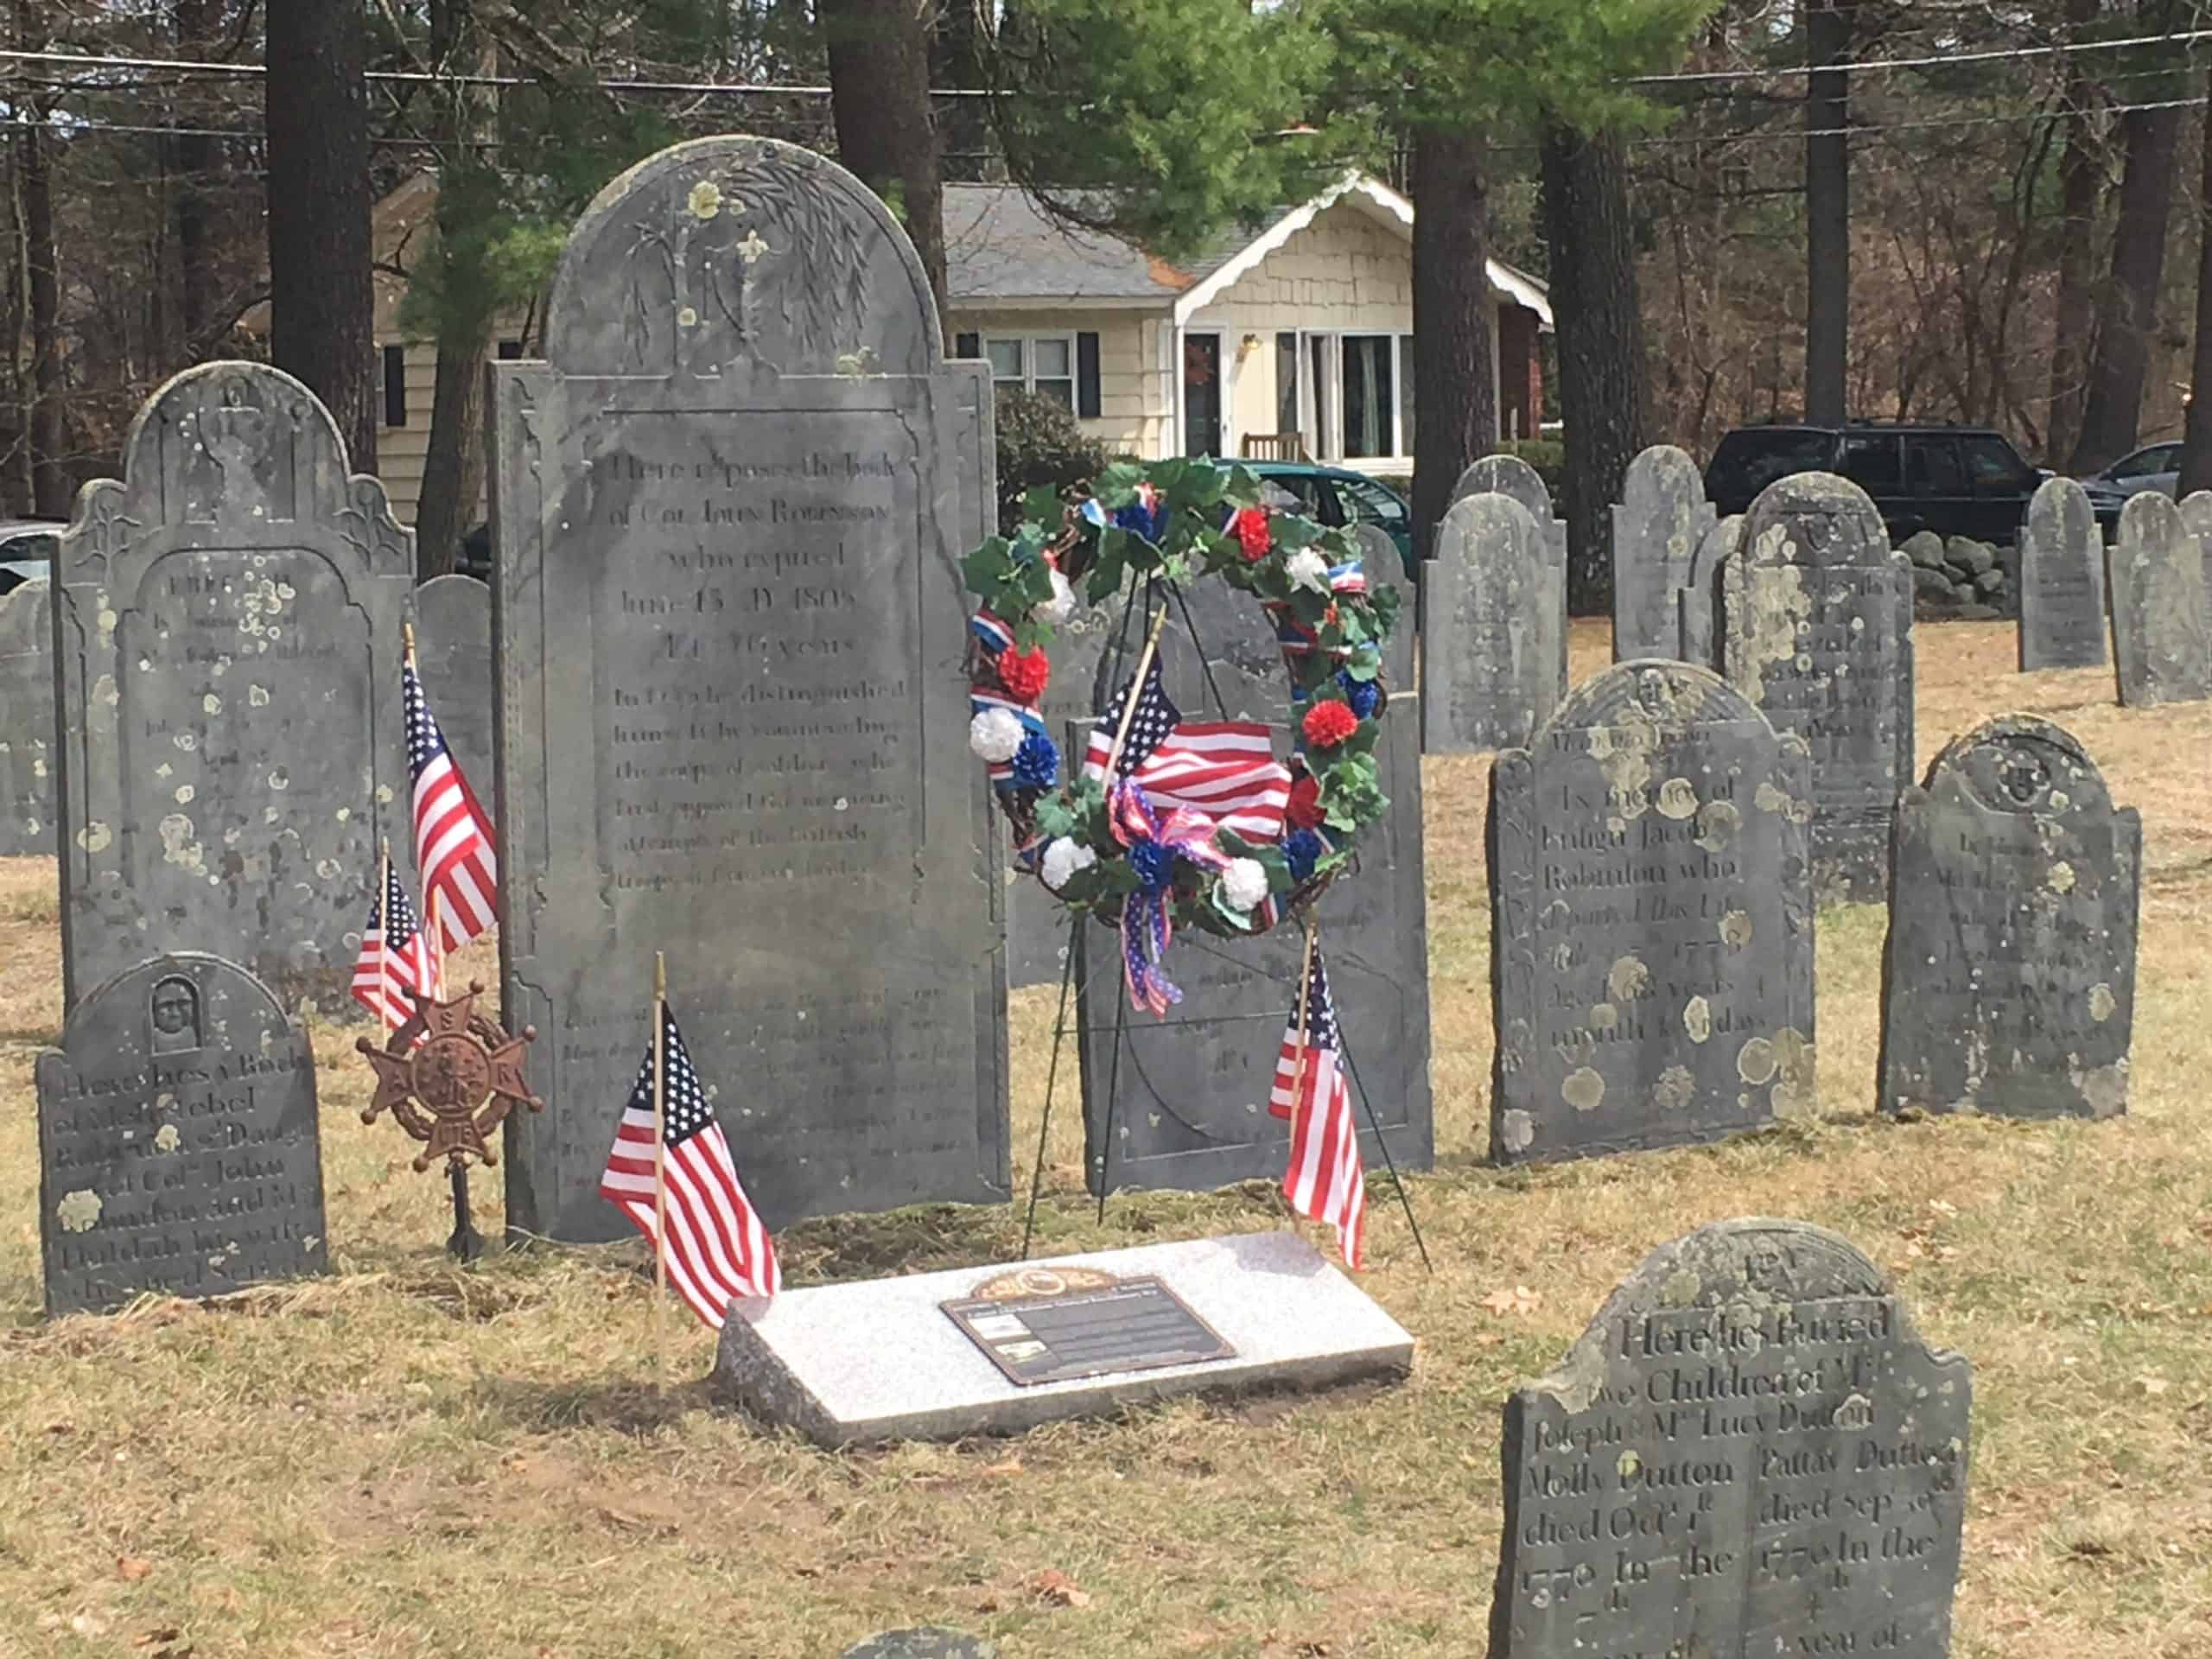 Patriots Day (April 19th) Candlelight Tribute at Westlawn Cemetery